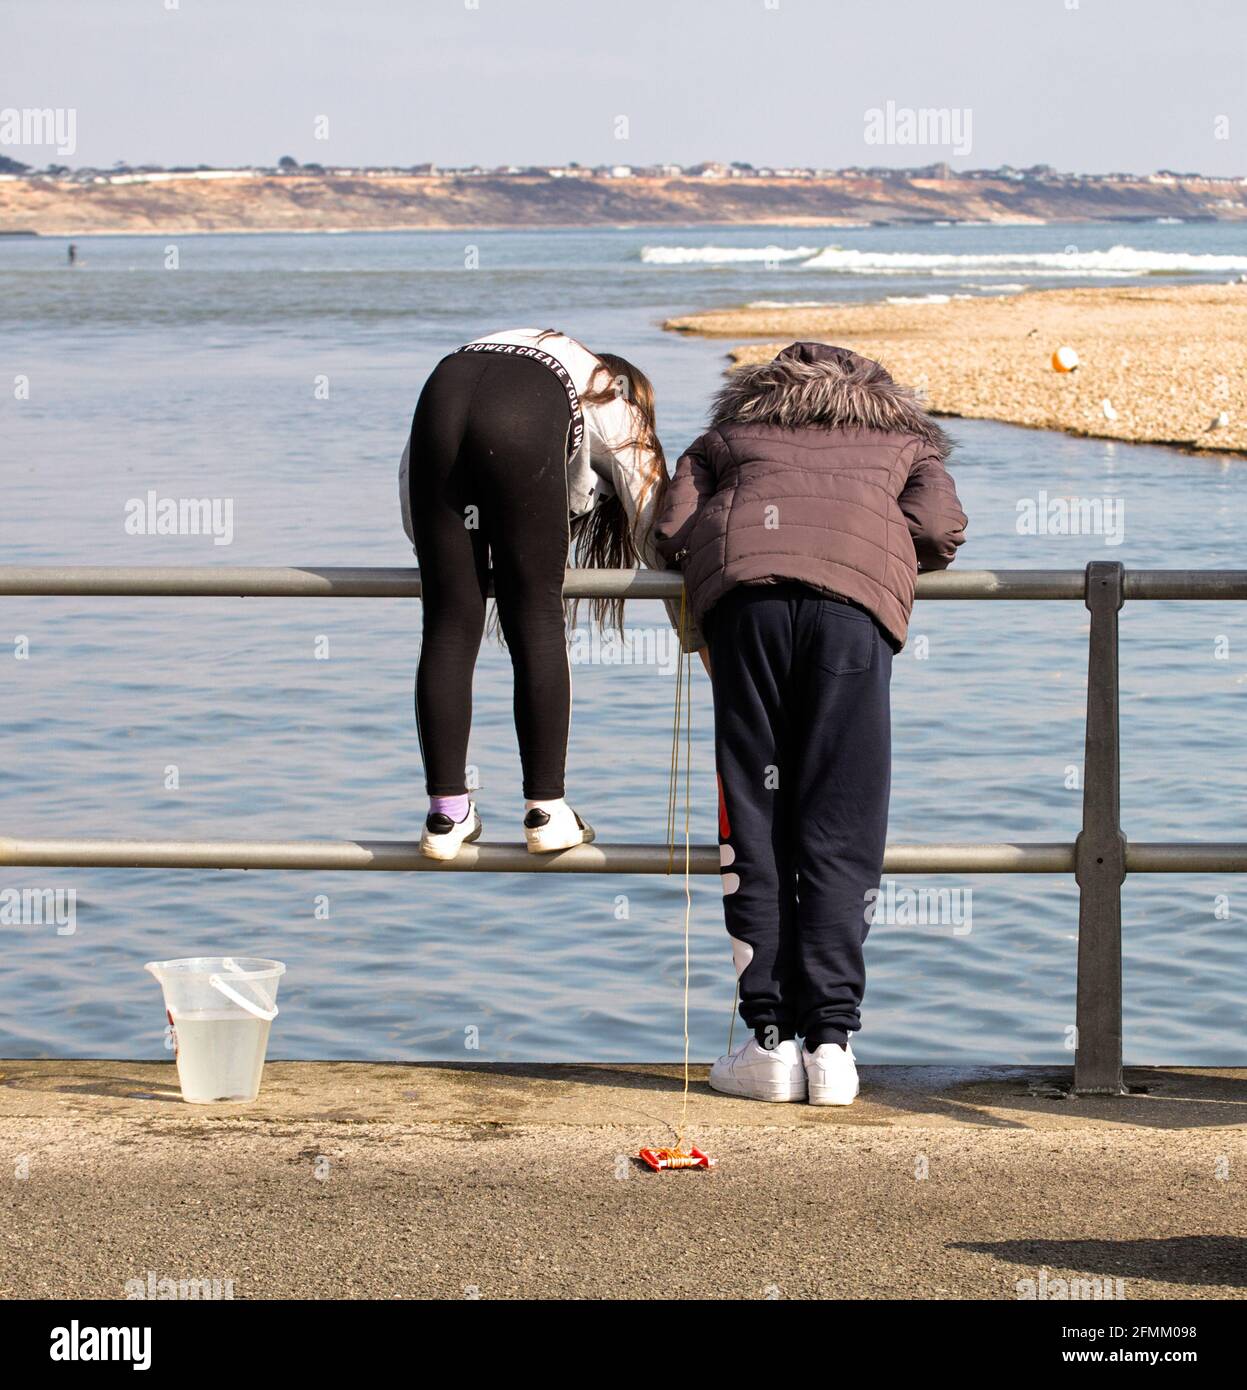 The Back View Of Two Young Girls, Children With A Crabbing Bucket Leaning Over Railings Looking IntoThe Sea Catching Crabs, Crabbing At Mudeford Quay Stock Photo